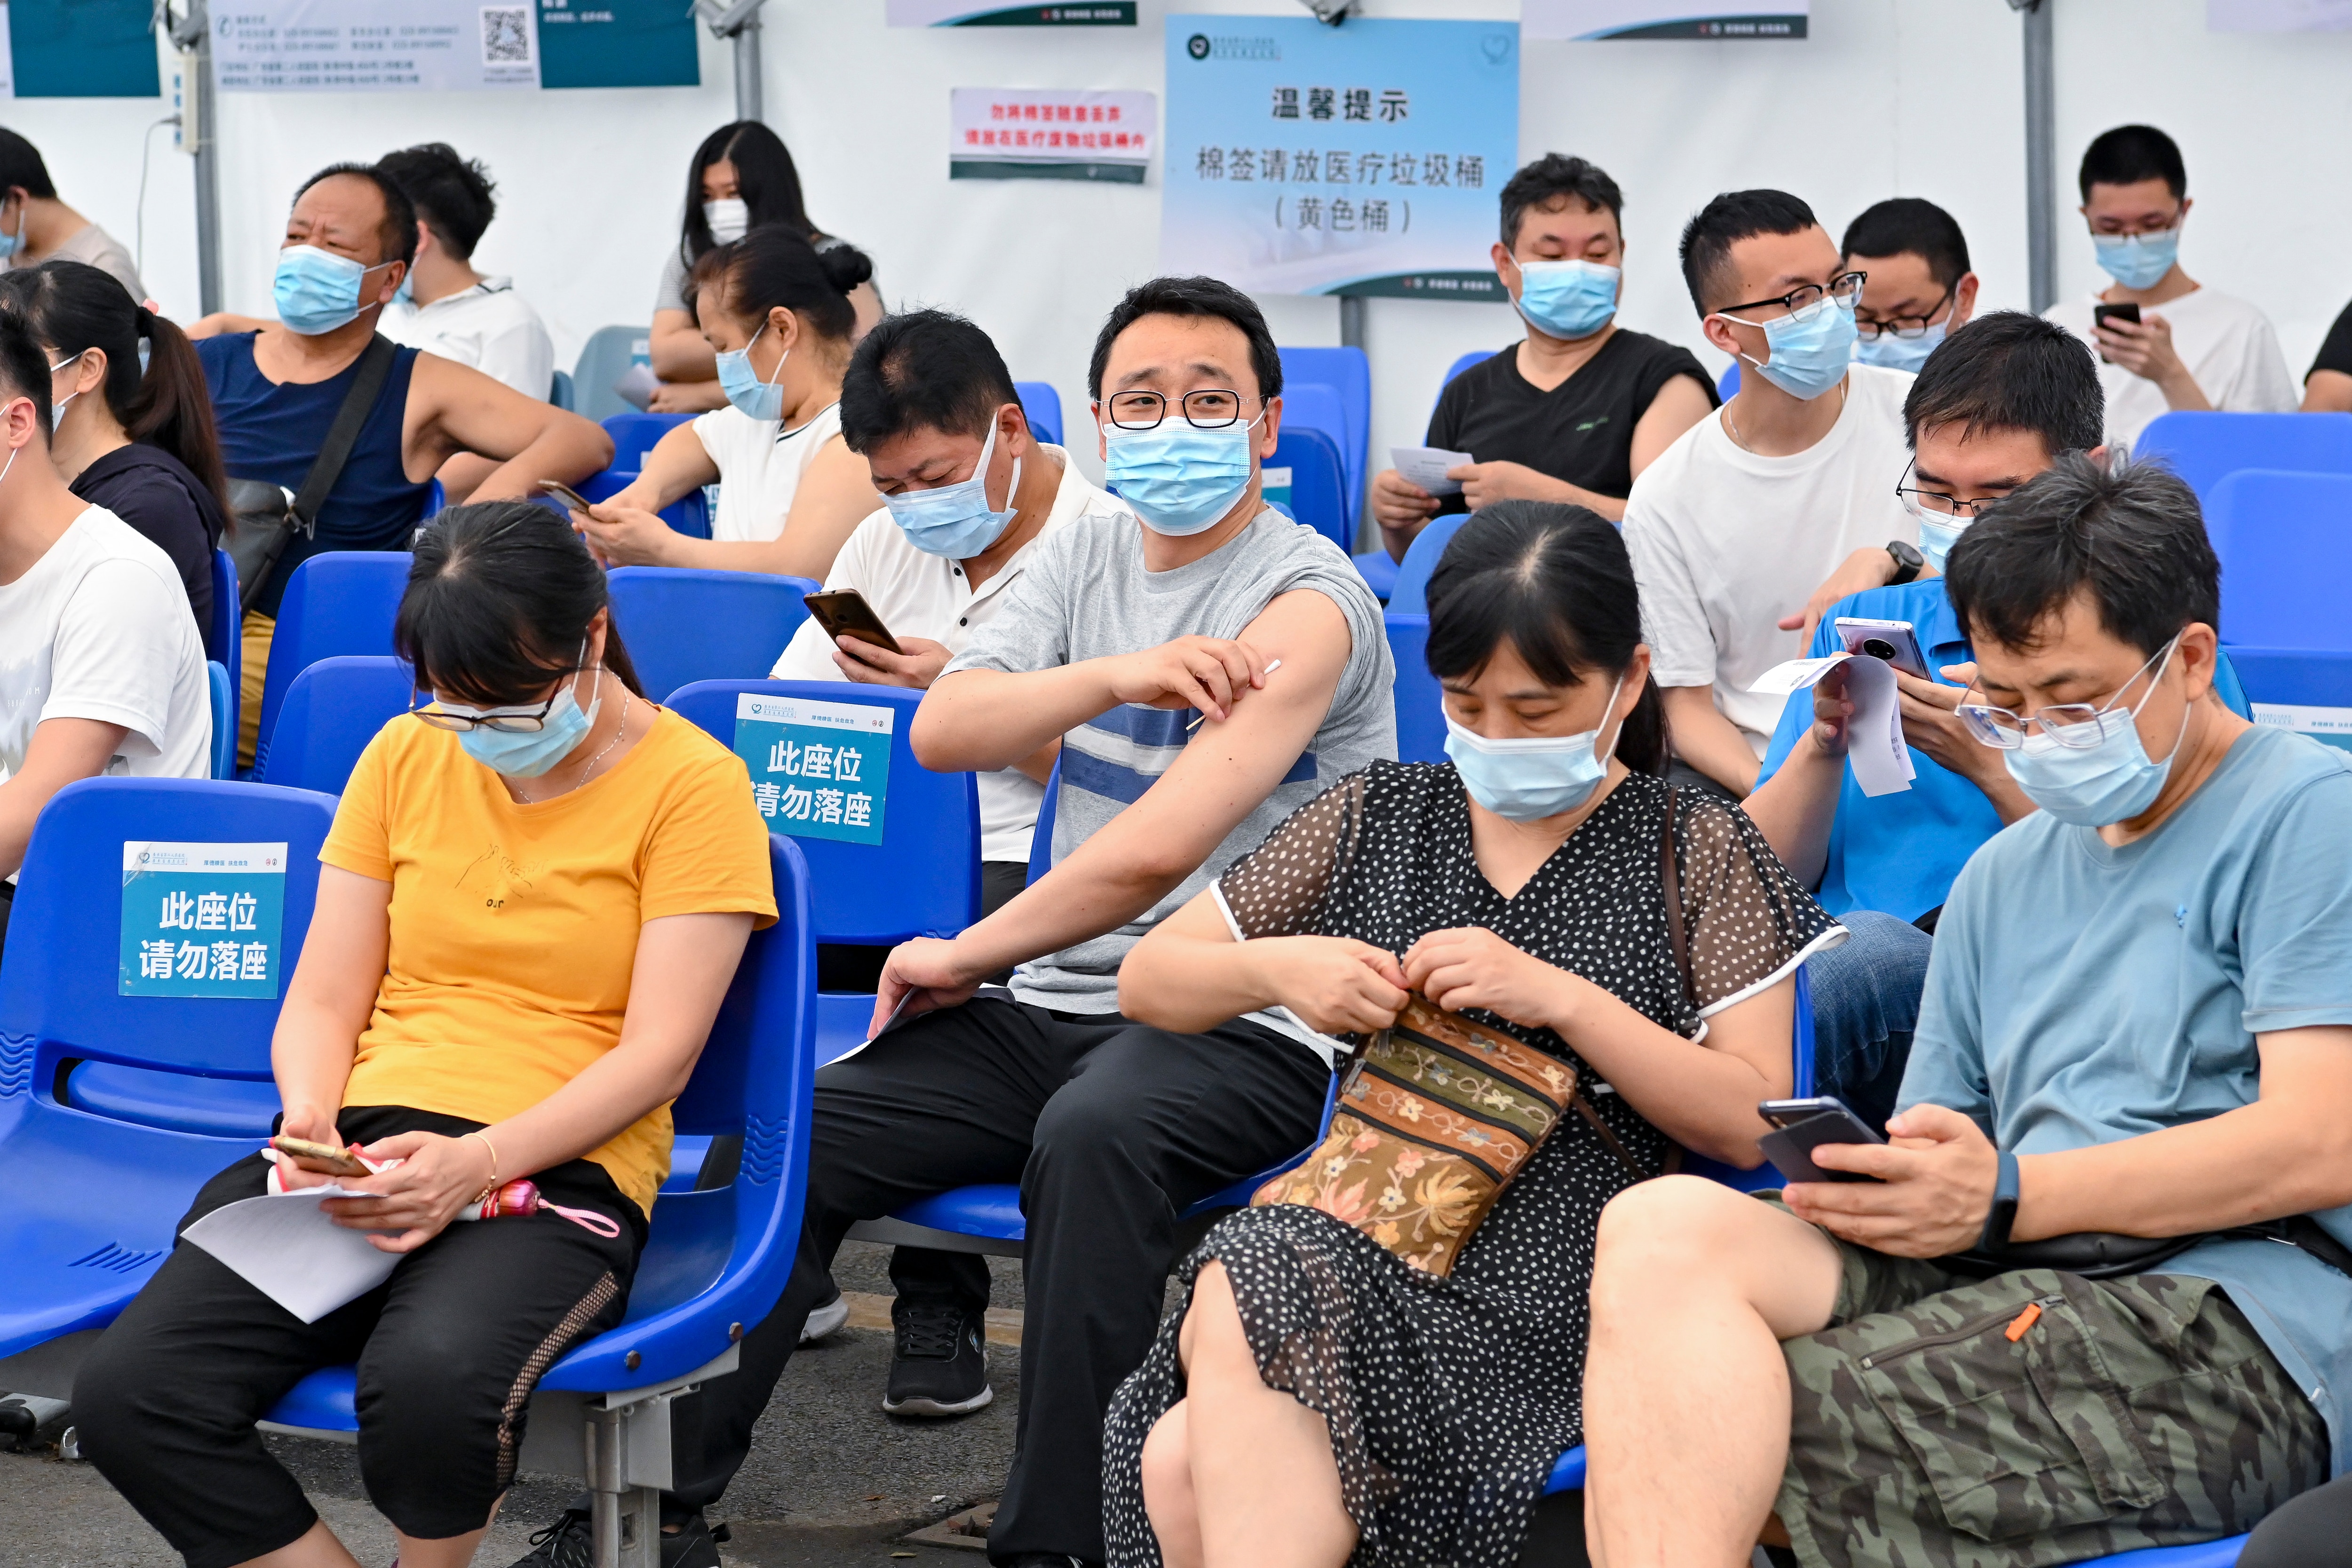 Local residents sit in an observation area after receiving a dose of the COVID-19 vaccine at Guangdong Second Provincial General Hospital.